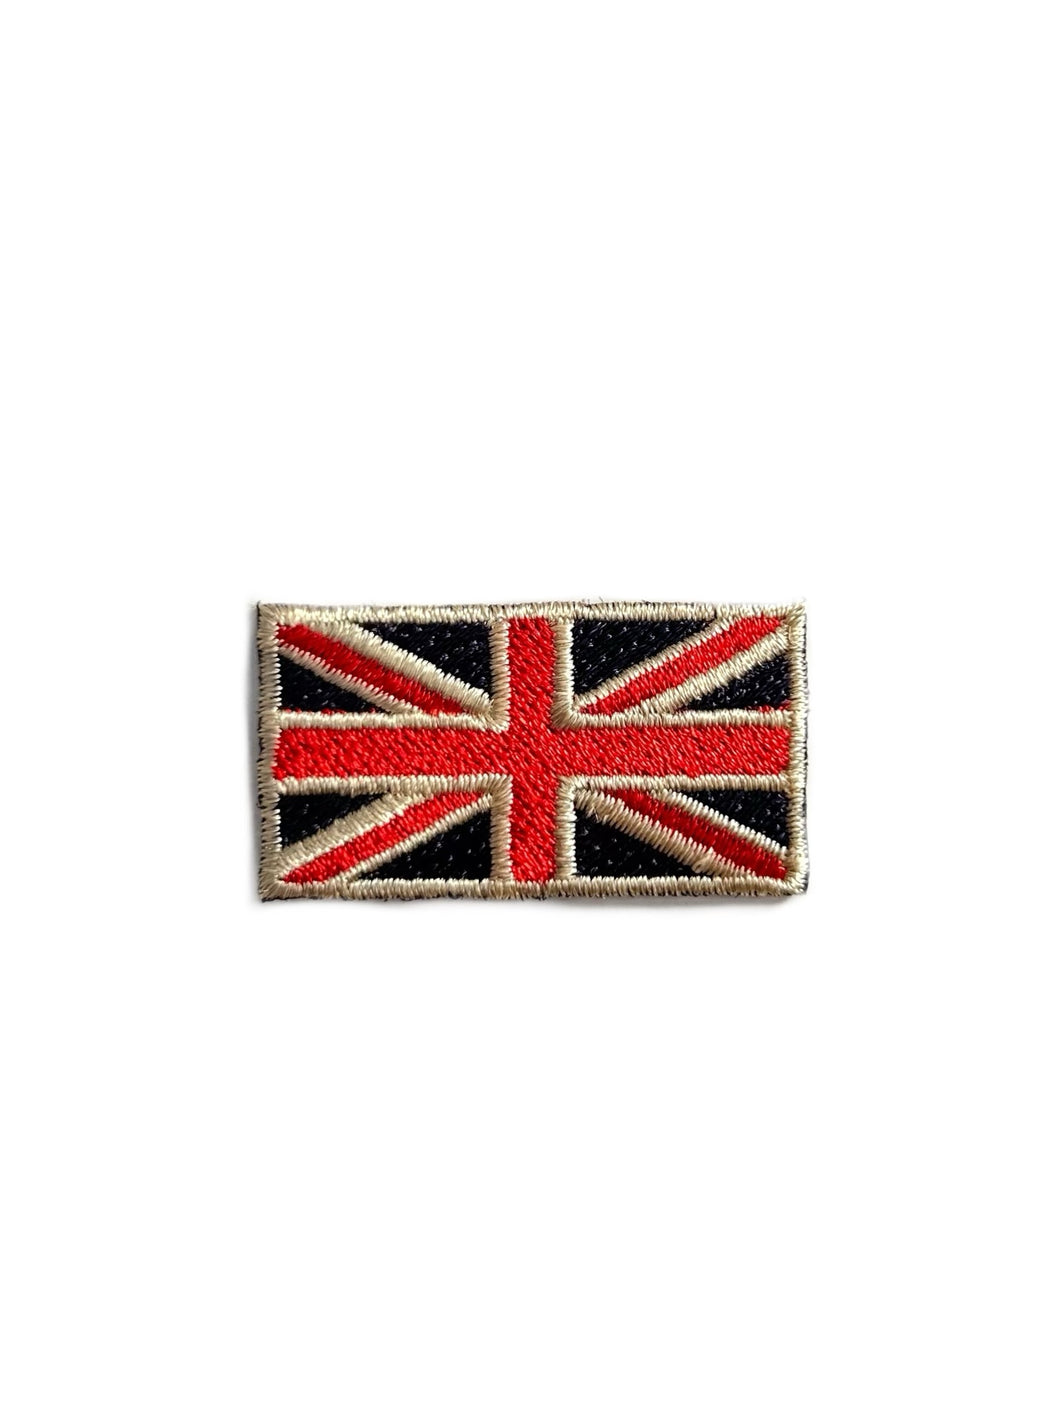 EMBROIDERY UNION JACK, SMALL